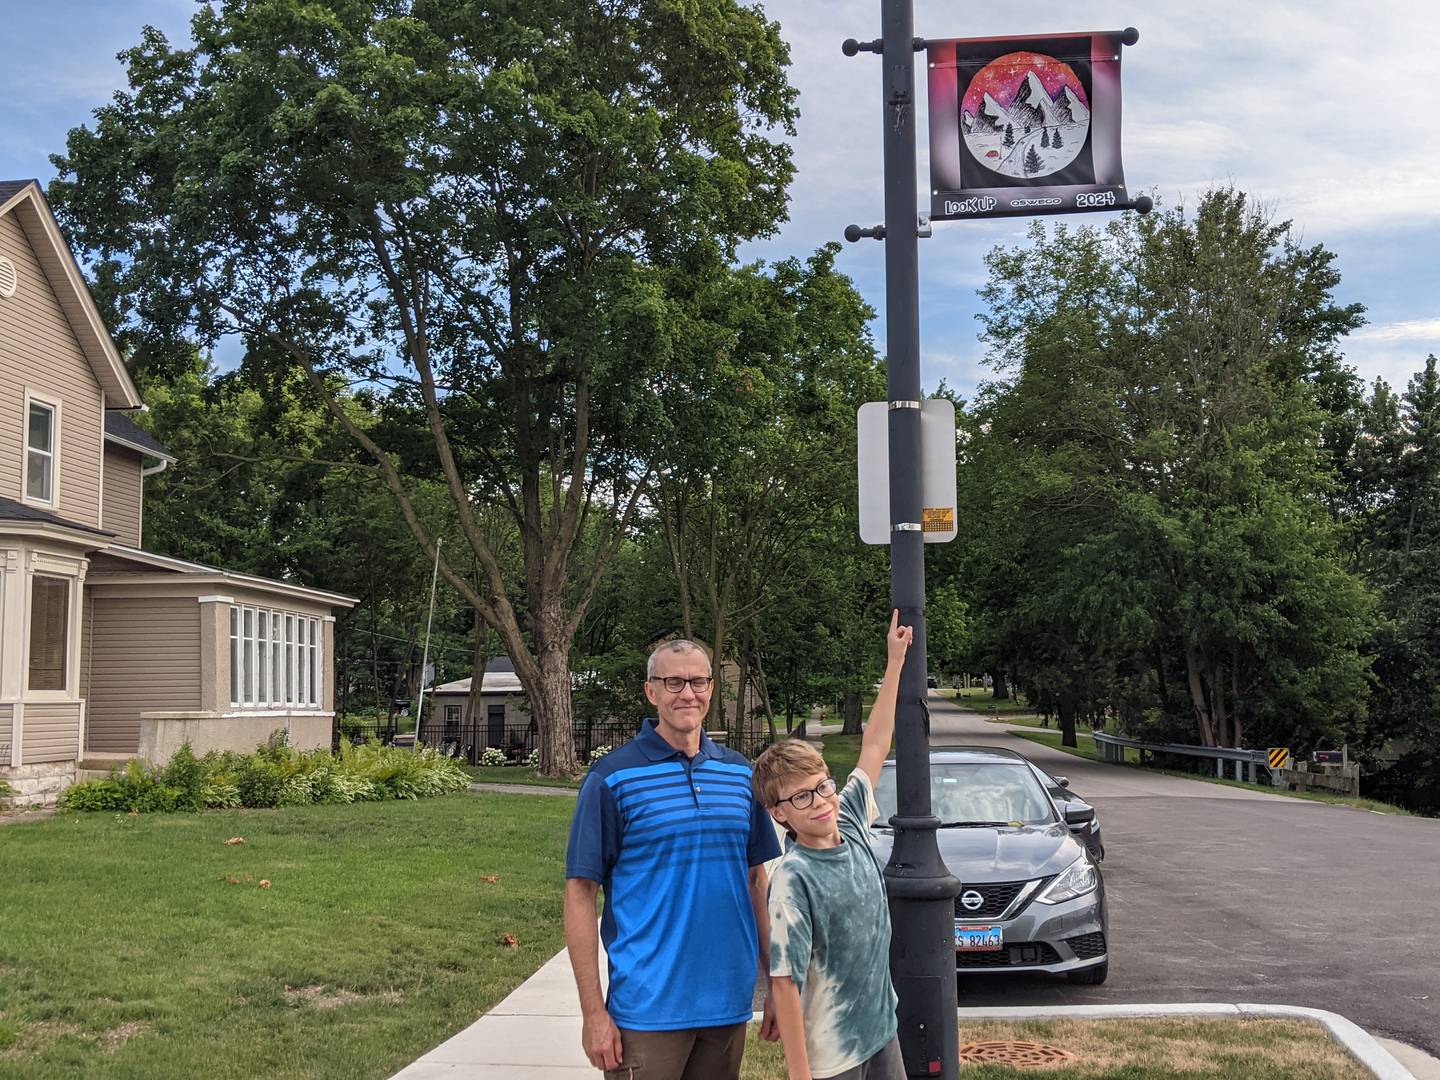 Joel Pierce, 11, who will attend Traughber Junior High School this fall, is happy to see his artwork on top of a light pole at the corner of Van Buren and Main streets in downtown Oswego.